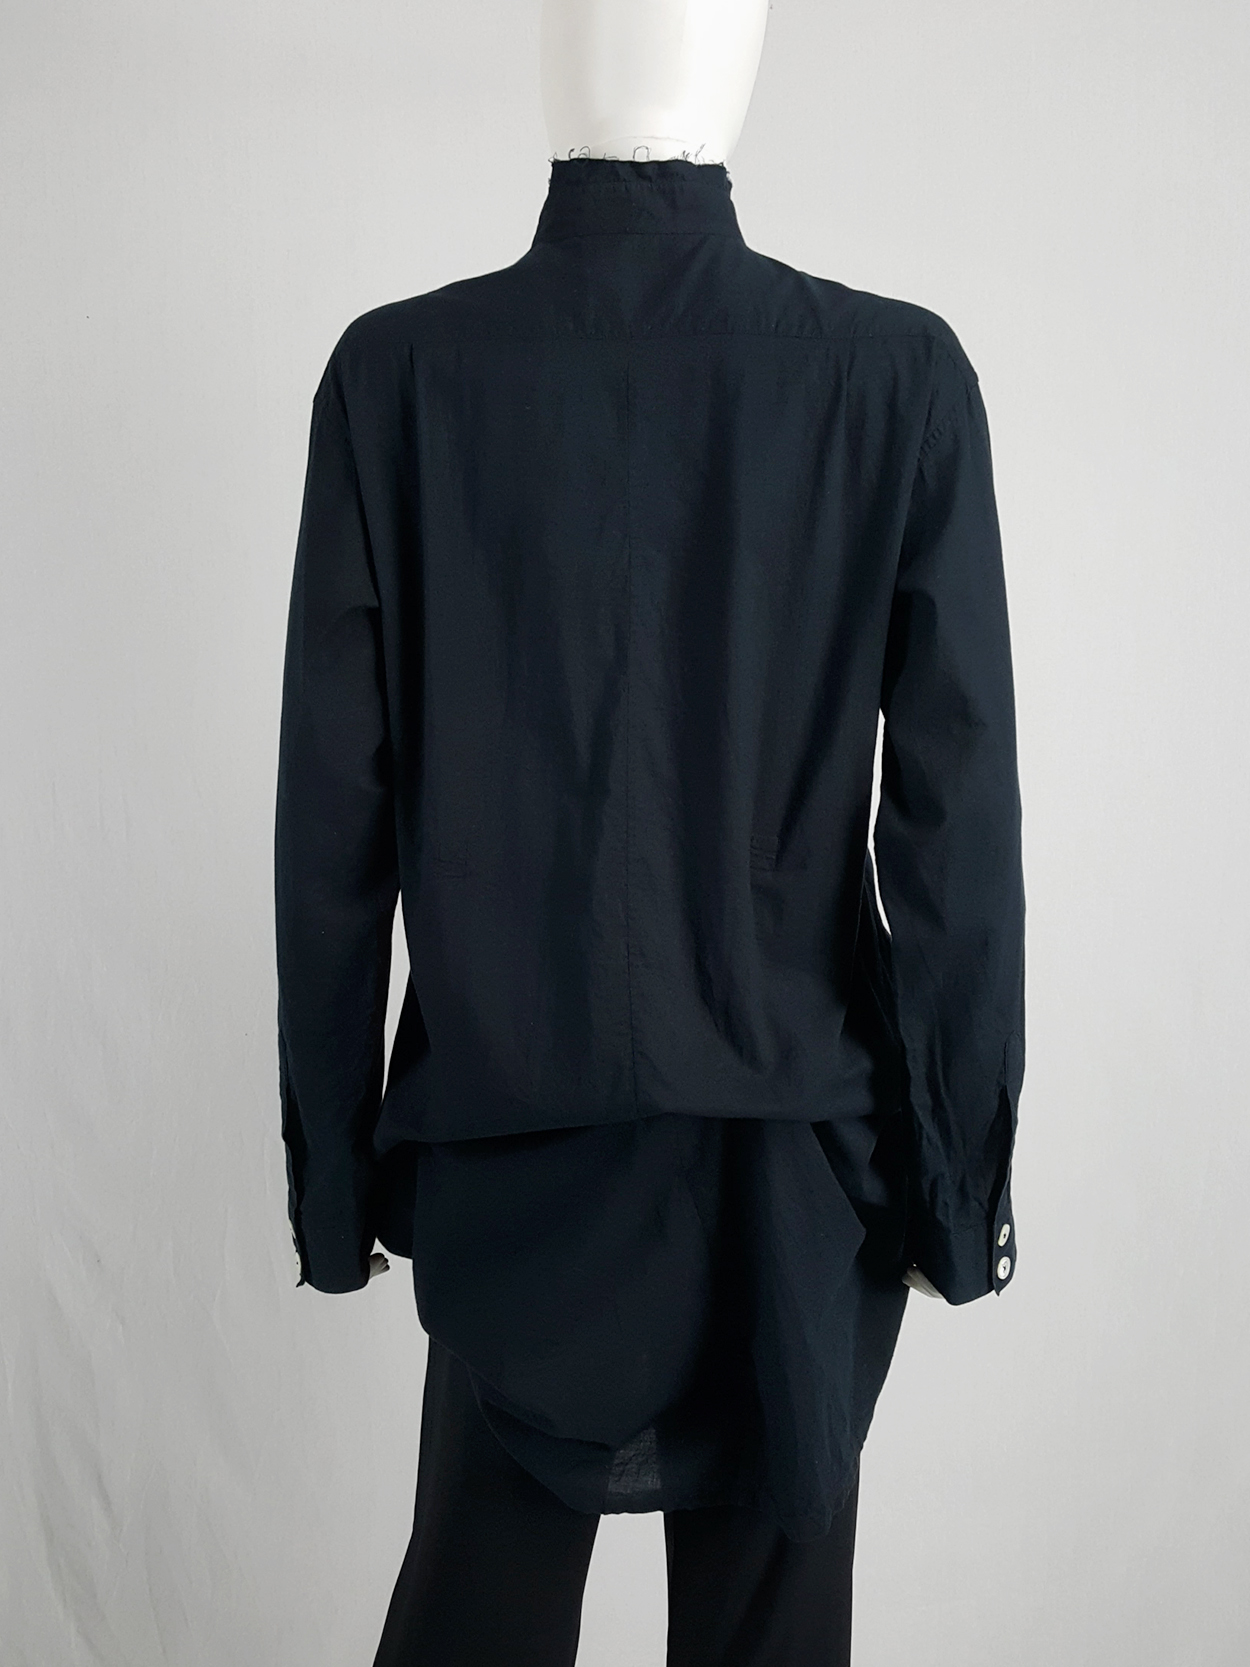 Ann Demeulemeester black draped shirt with frayed collar - V A N II T A S